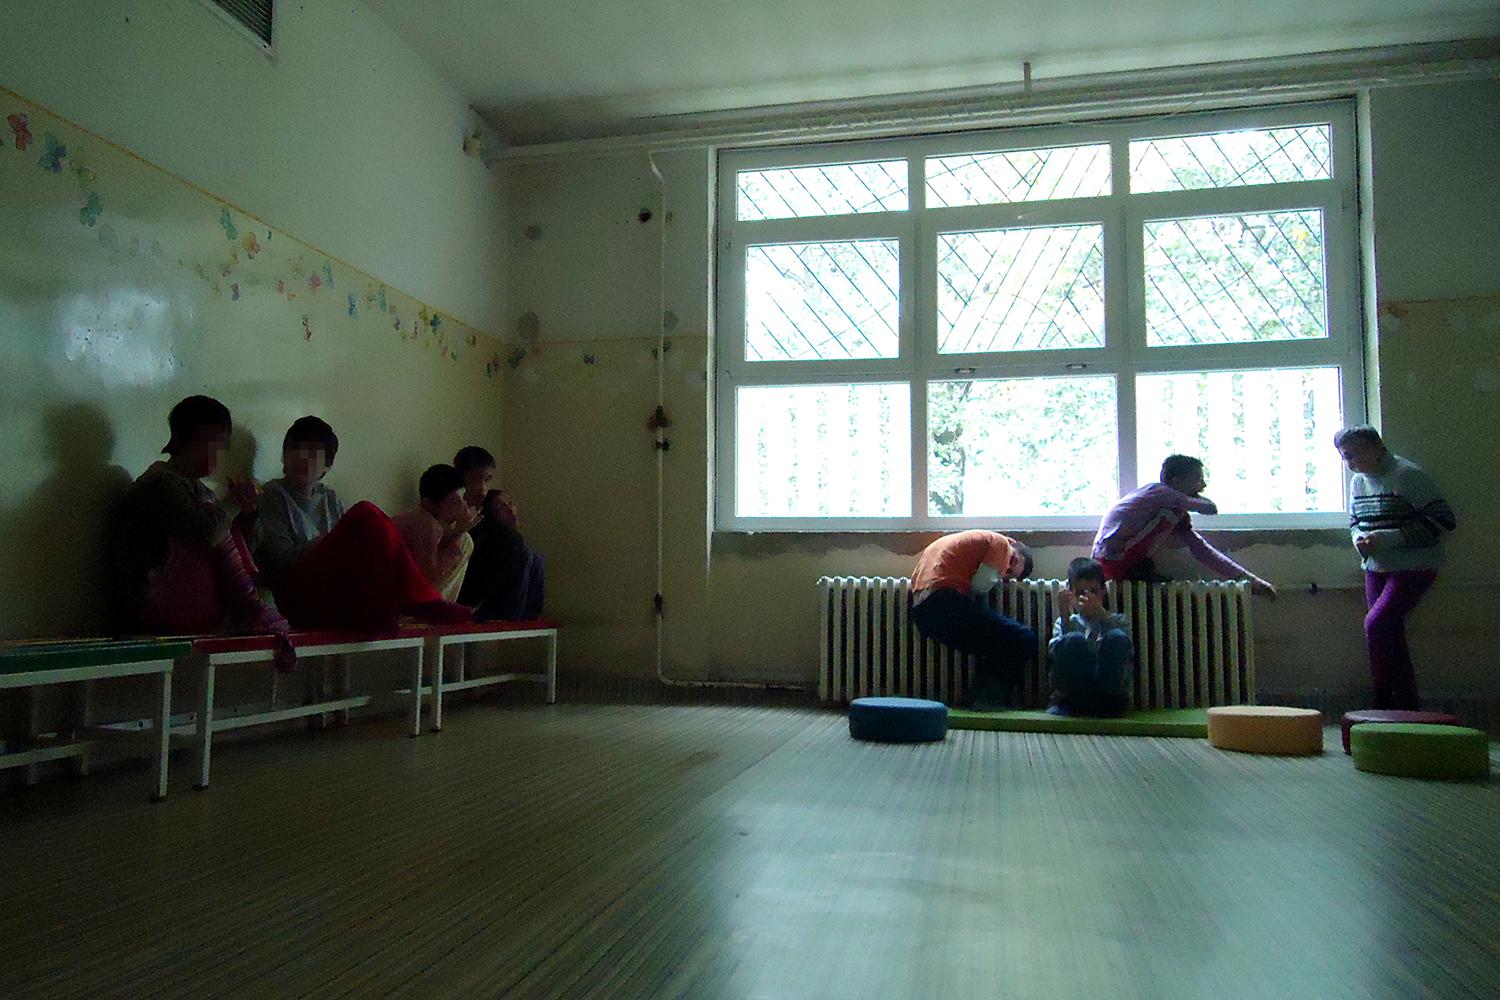 A living room in Veternik Institution where children and adults with disabilities spend most of their days. There are no toys, education materials, or carpets on the floor. The only available source of stimulation is a TV attached to the wall. 